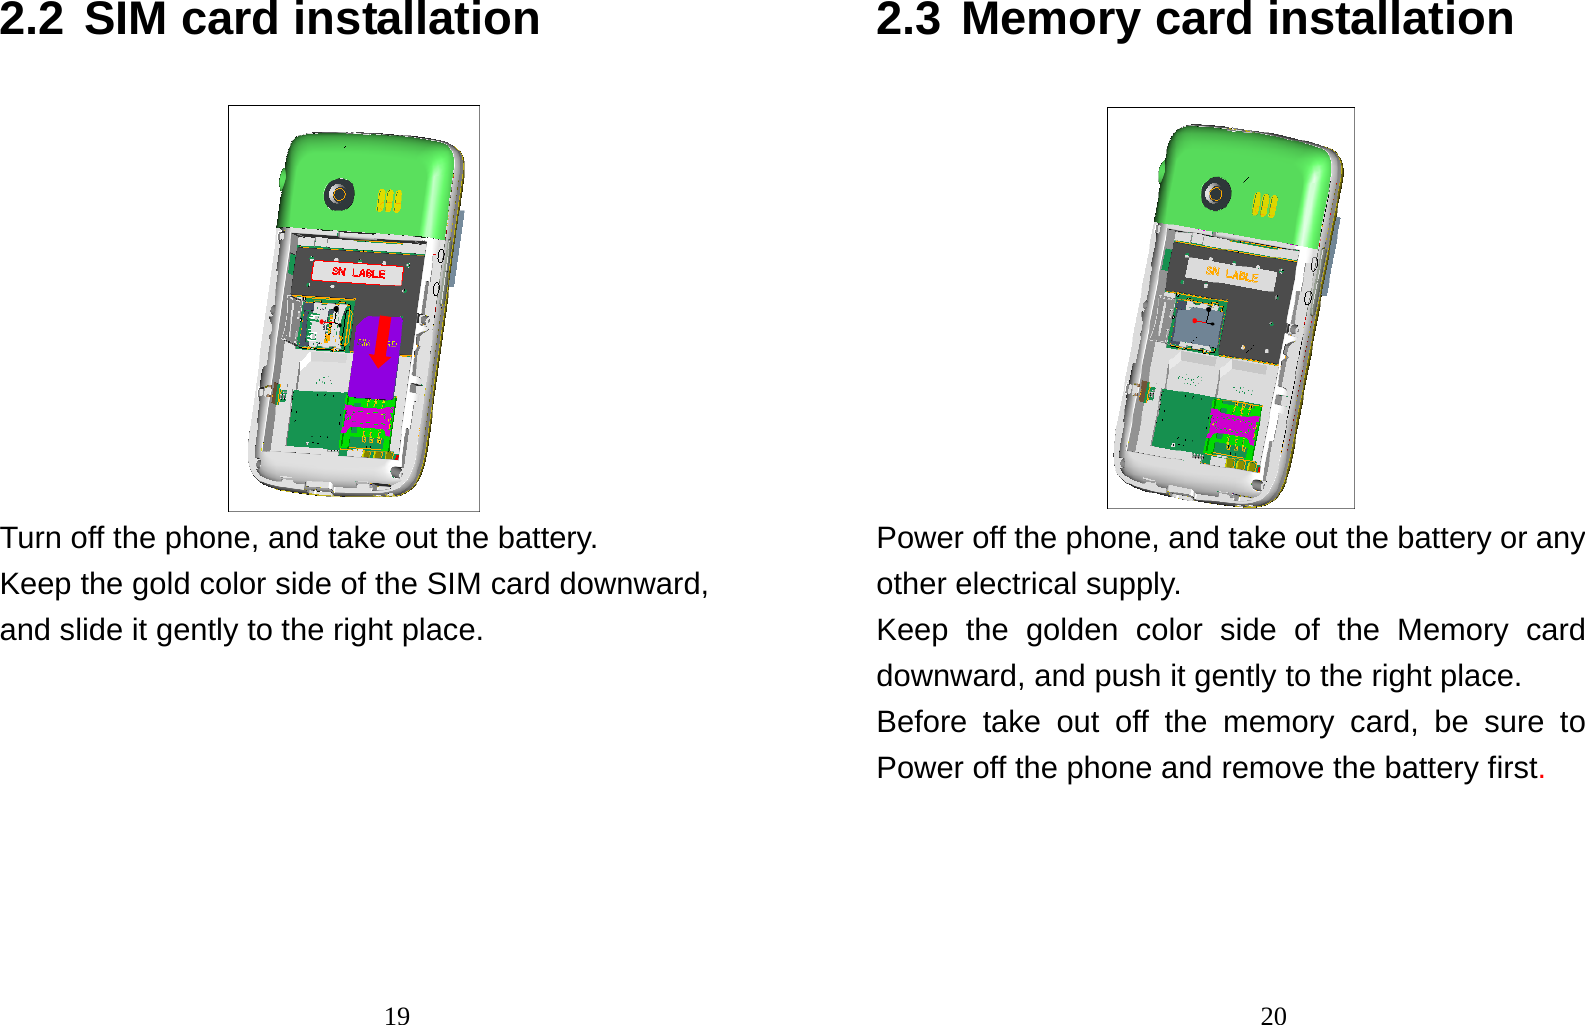                                192.2 SIM card installation  Turn off the phone, and take out the battery. Keep the gold color side of the SIM card downward, and slide it gently to the right place.                                202.3 Memory card installation  Power off the phone, and take out the battery or any other electrical supply. Keep the golden color side of the Memory card downward, and push it gently to the right place. Before take out off the memory card, be sure to Power off the phone and remove the battery first. 